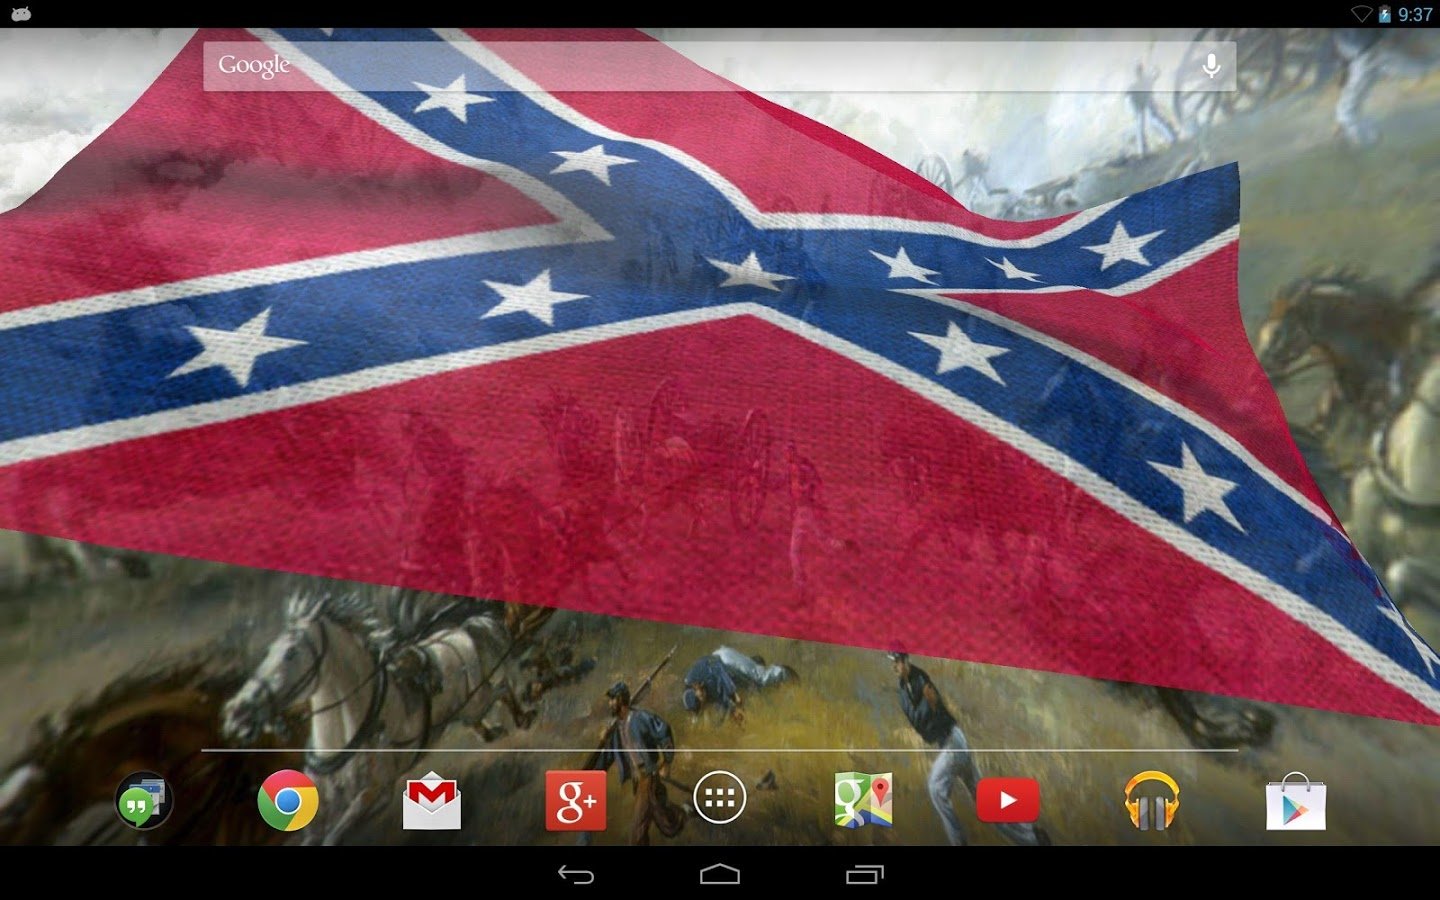 Rebel Flag Live Wallpaper   Android Apps on Google Play 1440x900